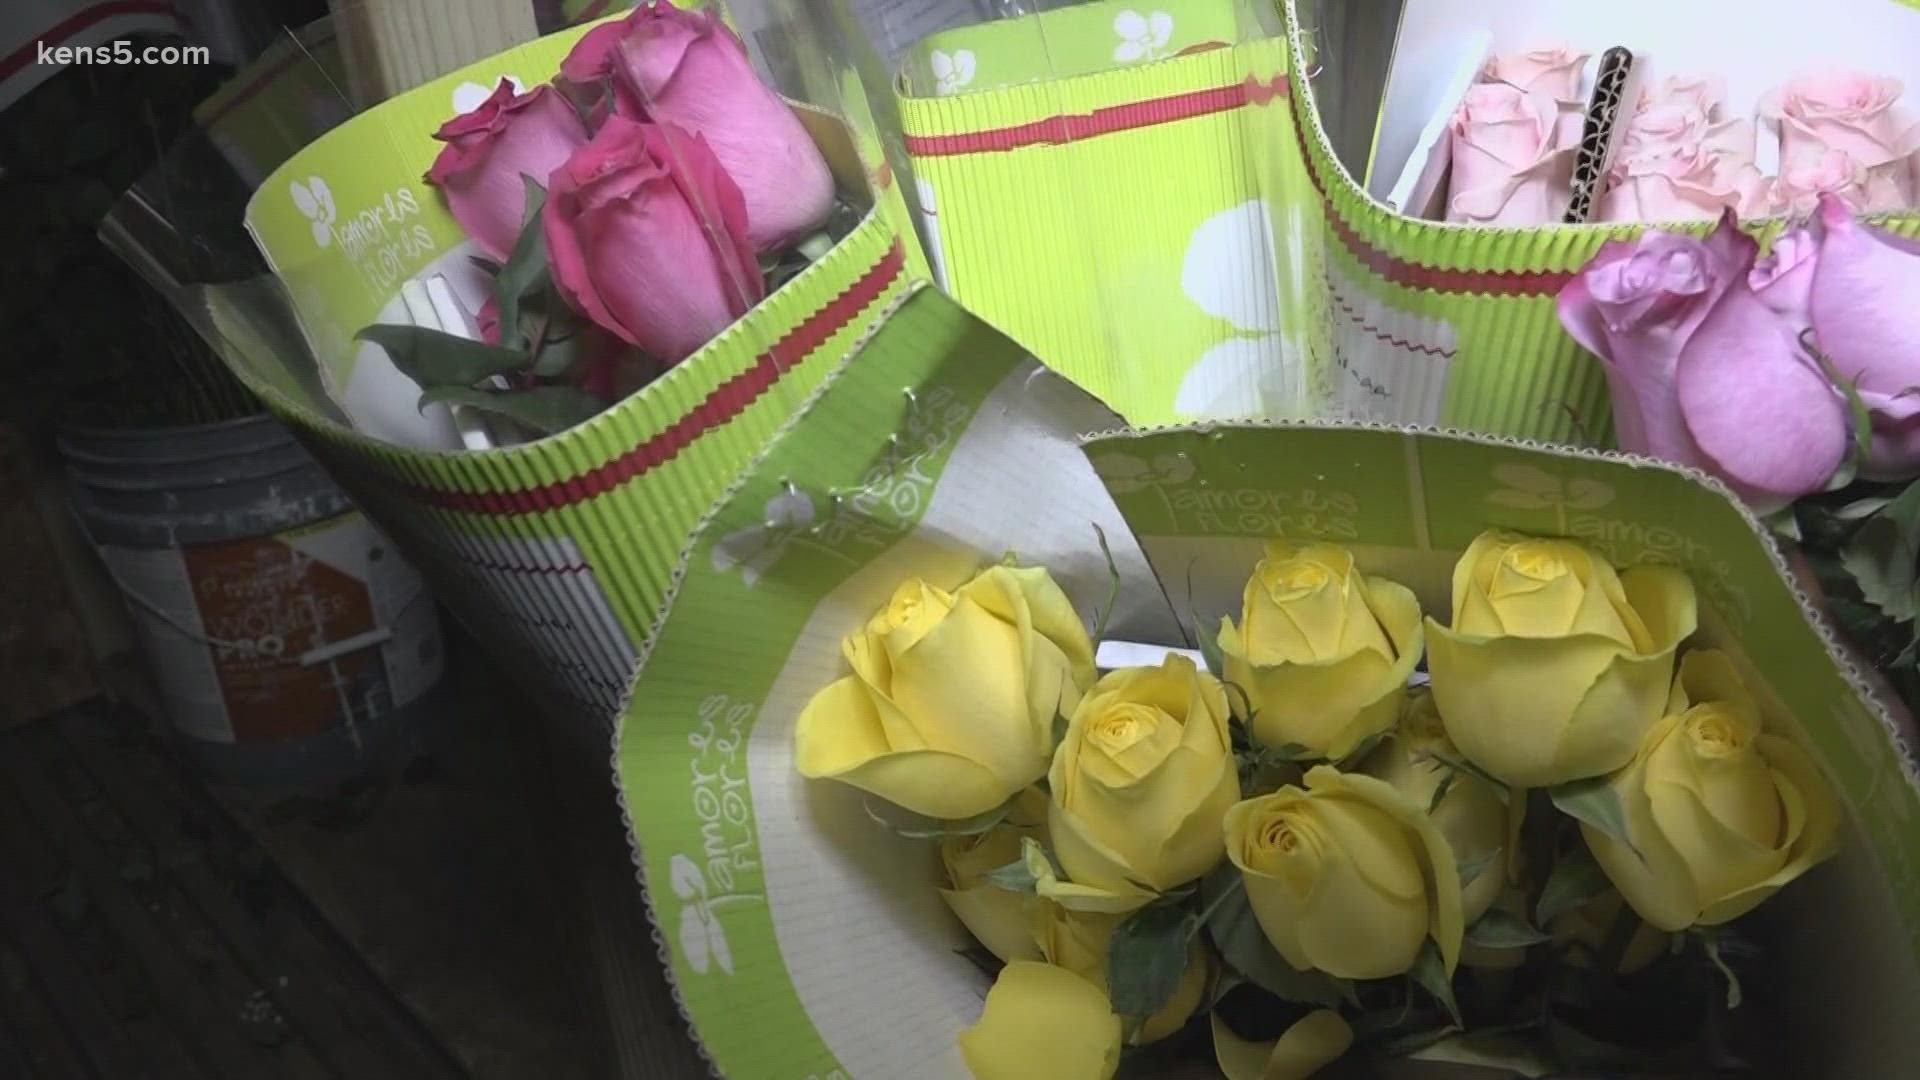 Customers of Betty's Flower Shop usually don't have to pay any delivery fees. But alarming fuel costs could soon change that to offset the expensive fuel bills.